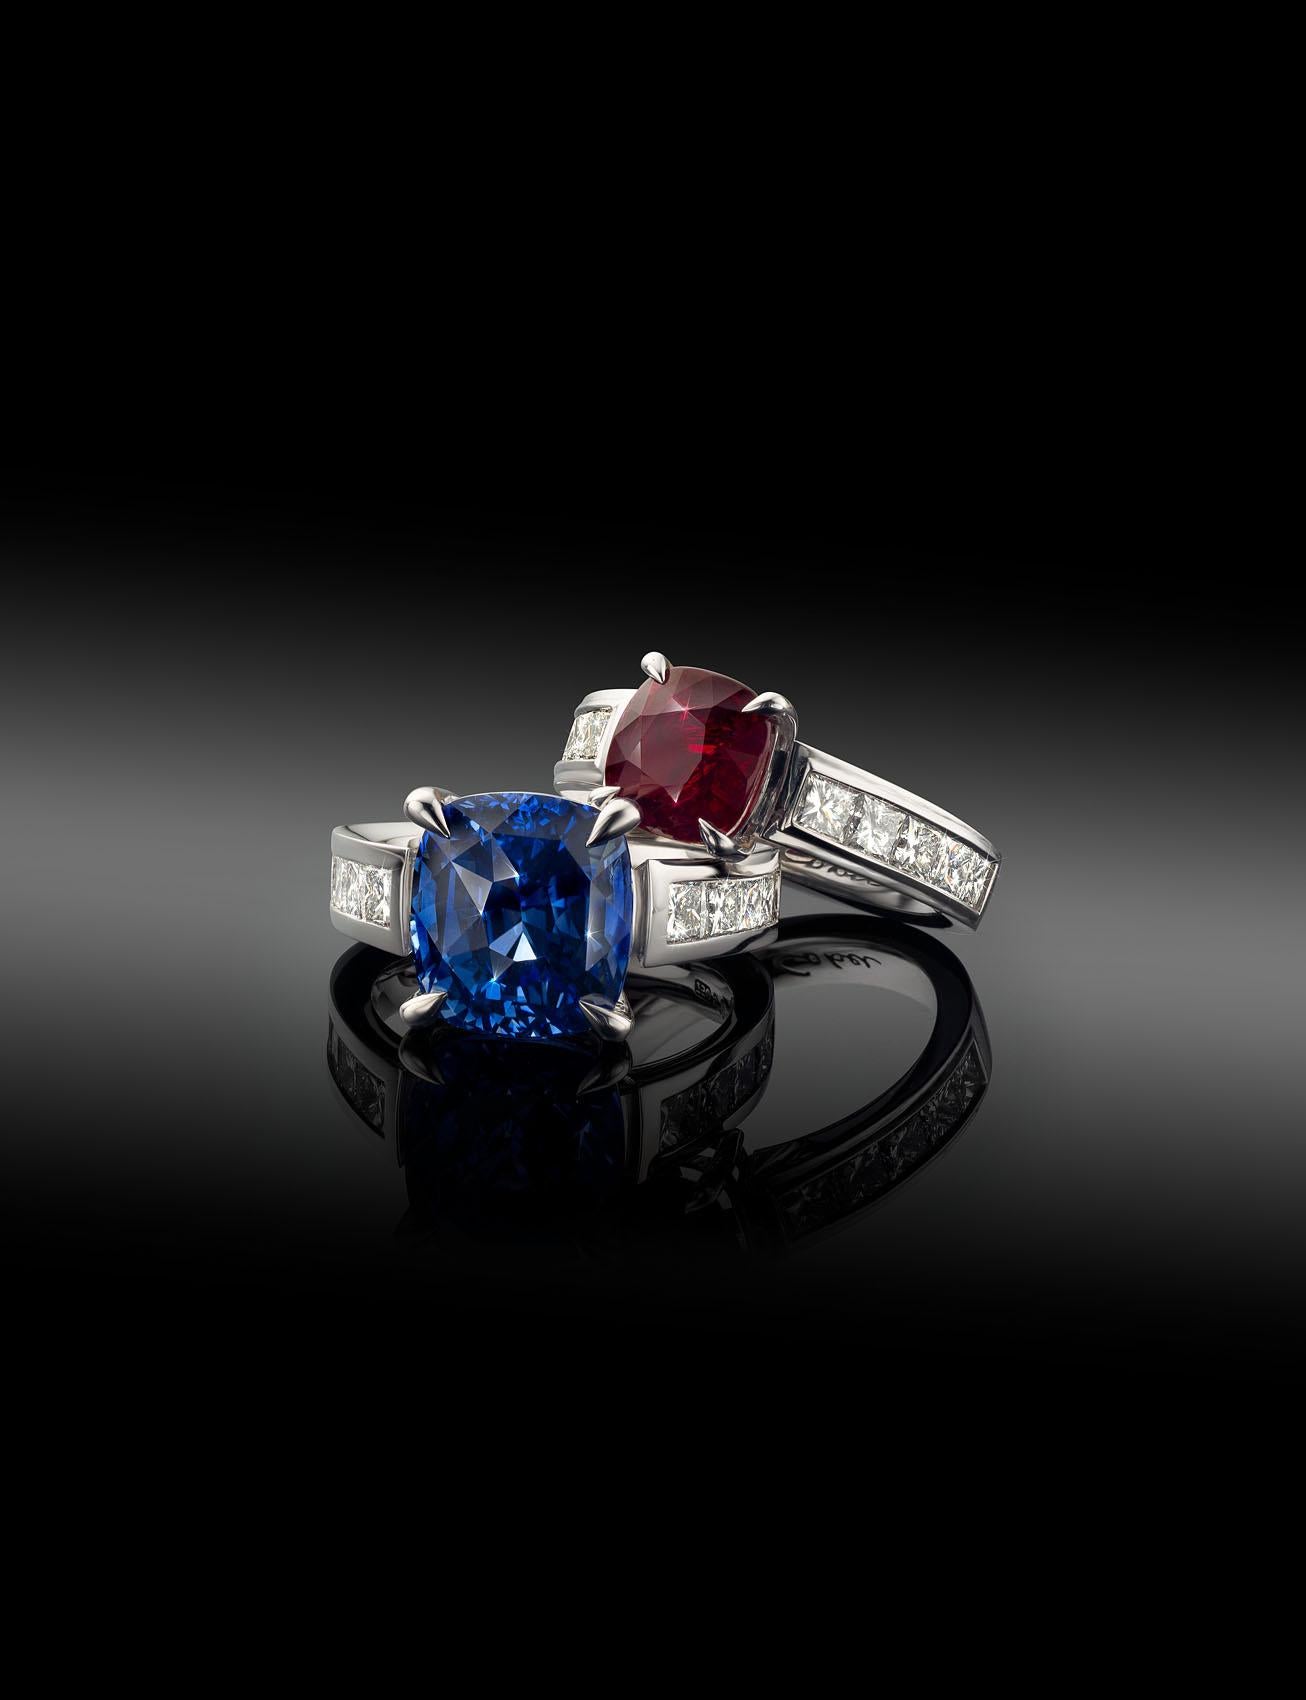 For Sale:  Cober Jewellery with 3.03 Carat Ruby  1.60 Carat total Diamonds White Gold Ring  11